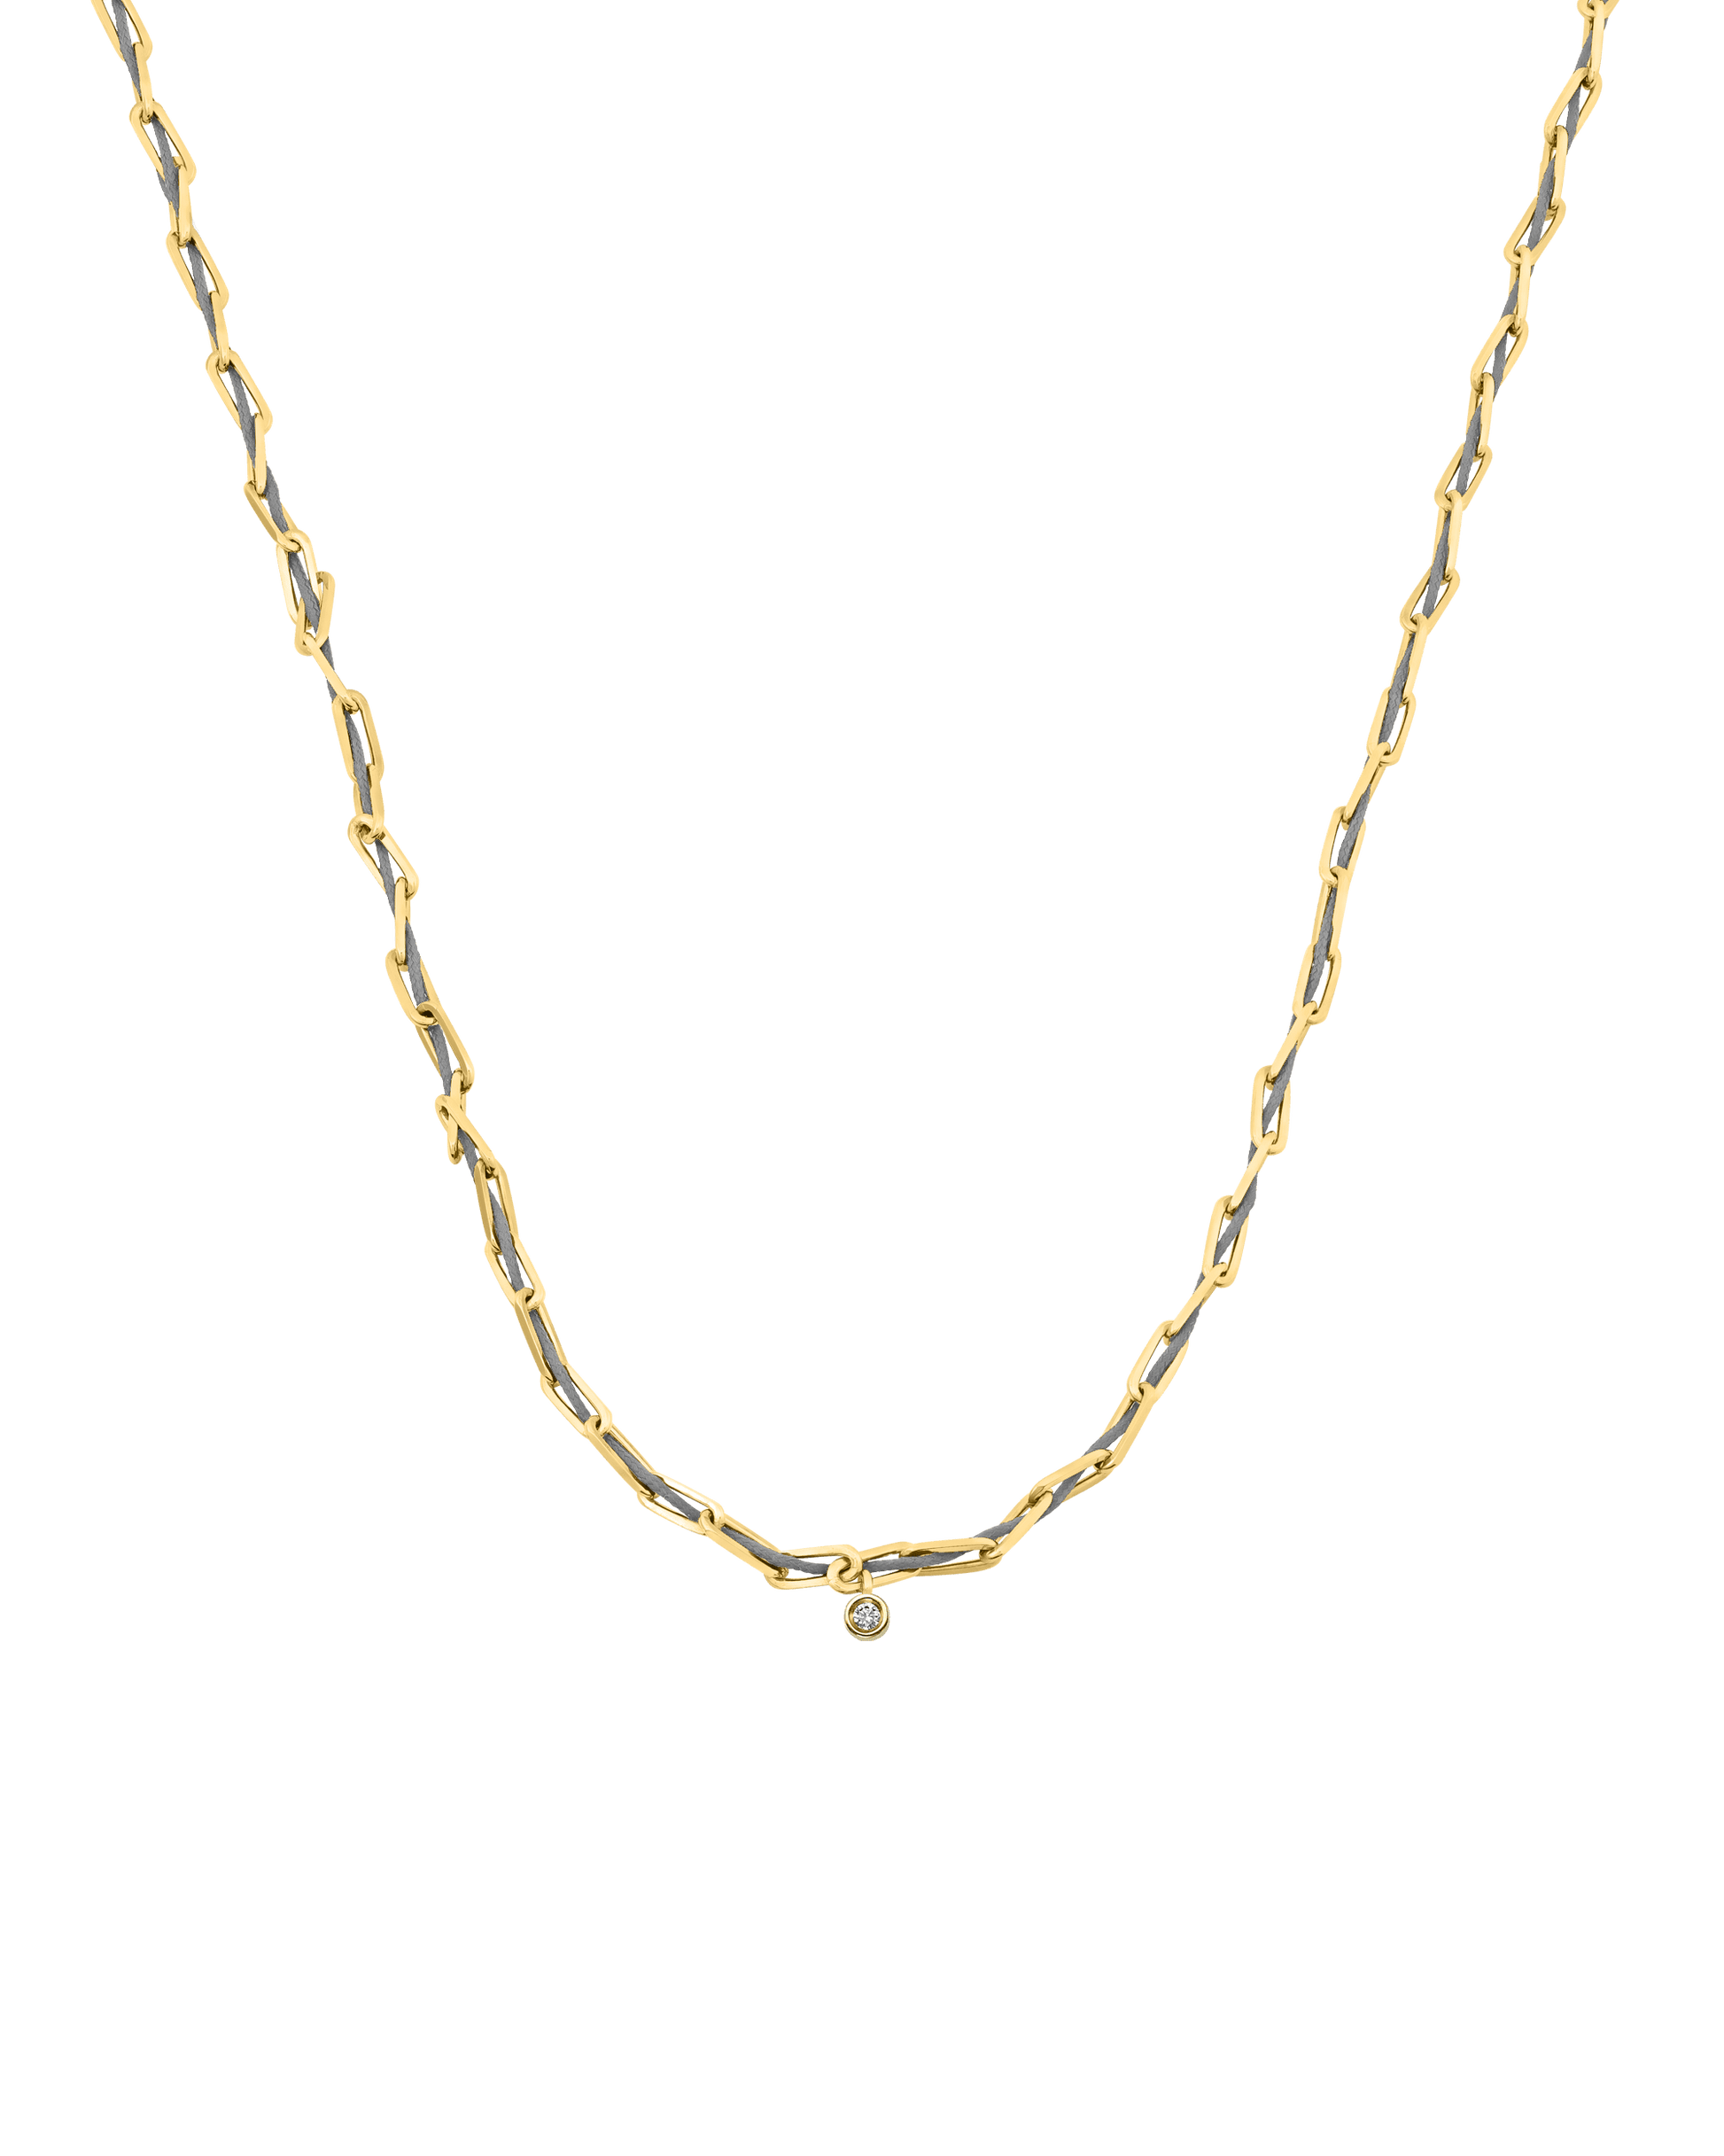 Twine Diamond Necklace - 18K Gold Vermeil Necklaces magal-dev Grey Small: 0.03ct 16"